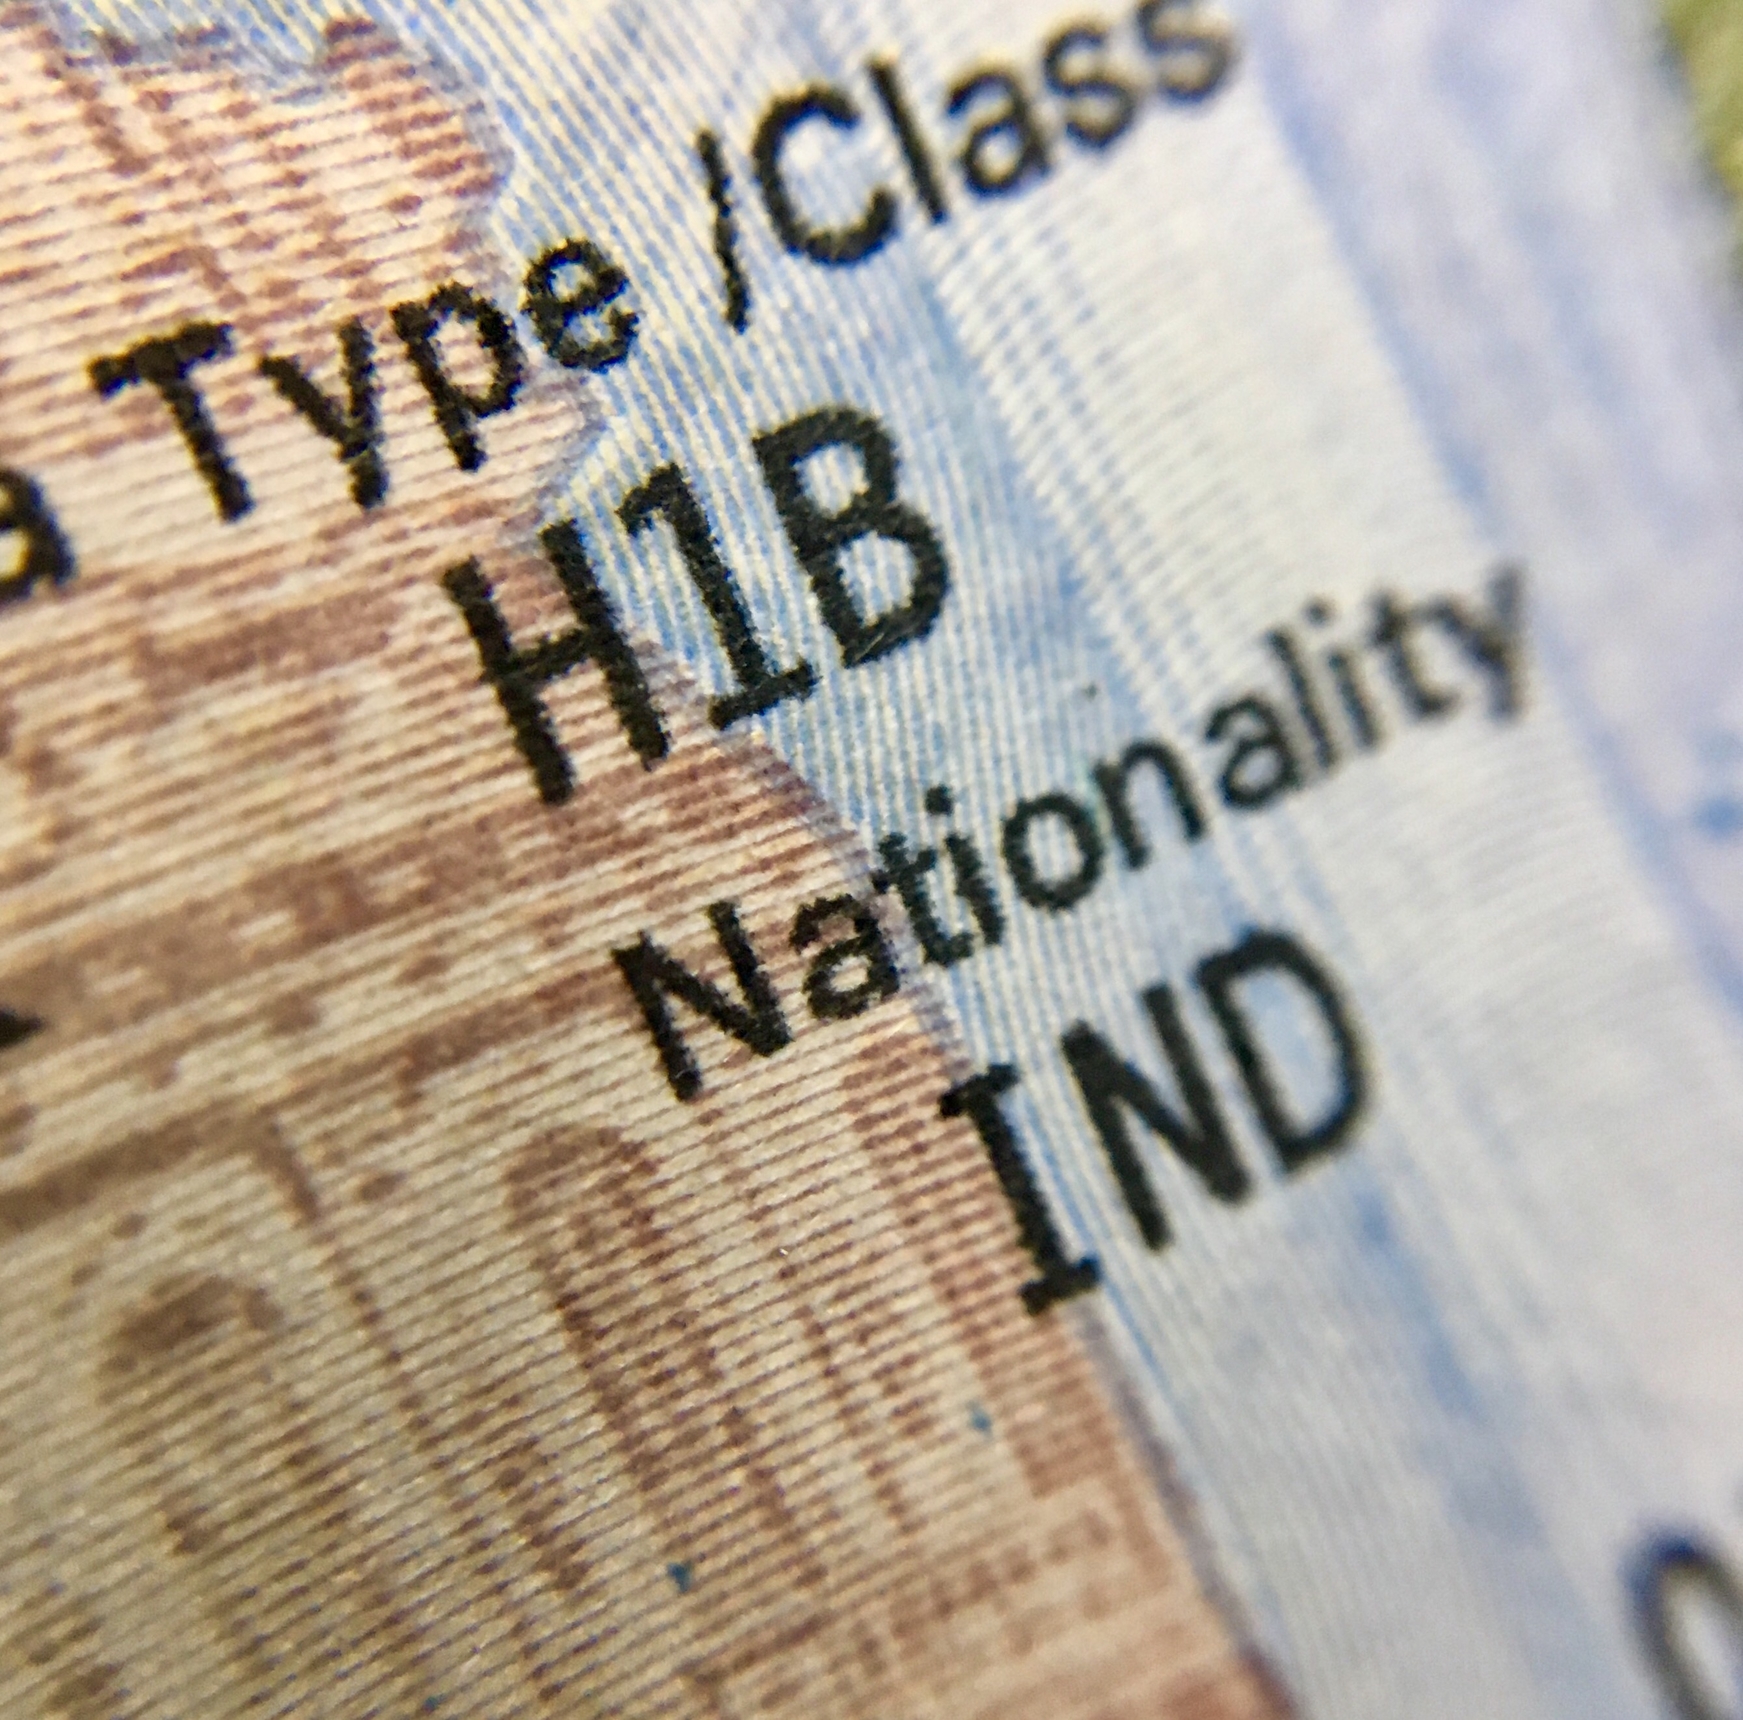 USCIS Announces Registration Period for H-1B Cap for Fiscal Year 2023